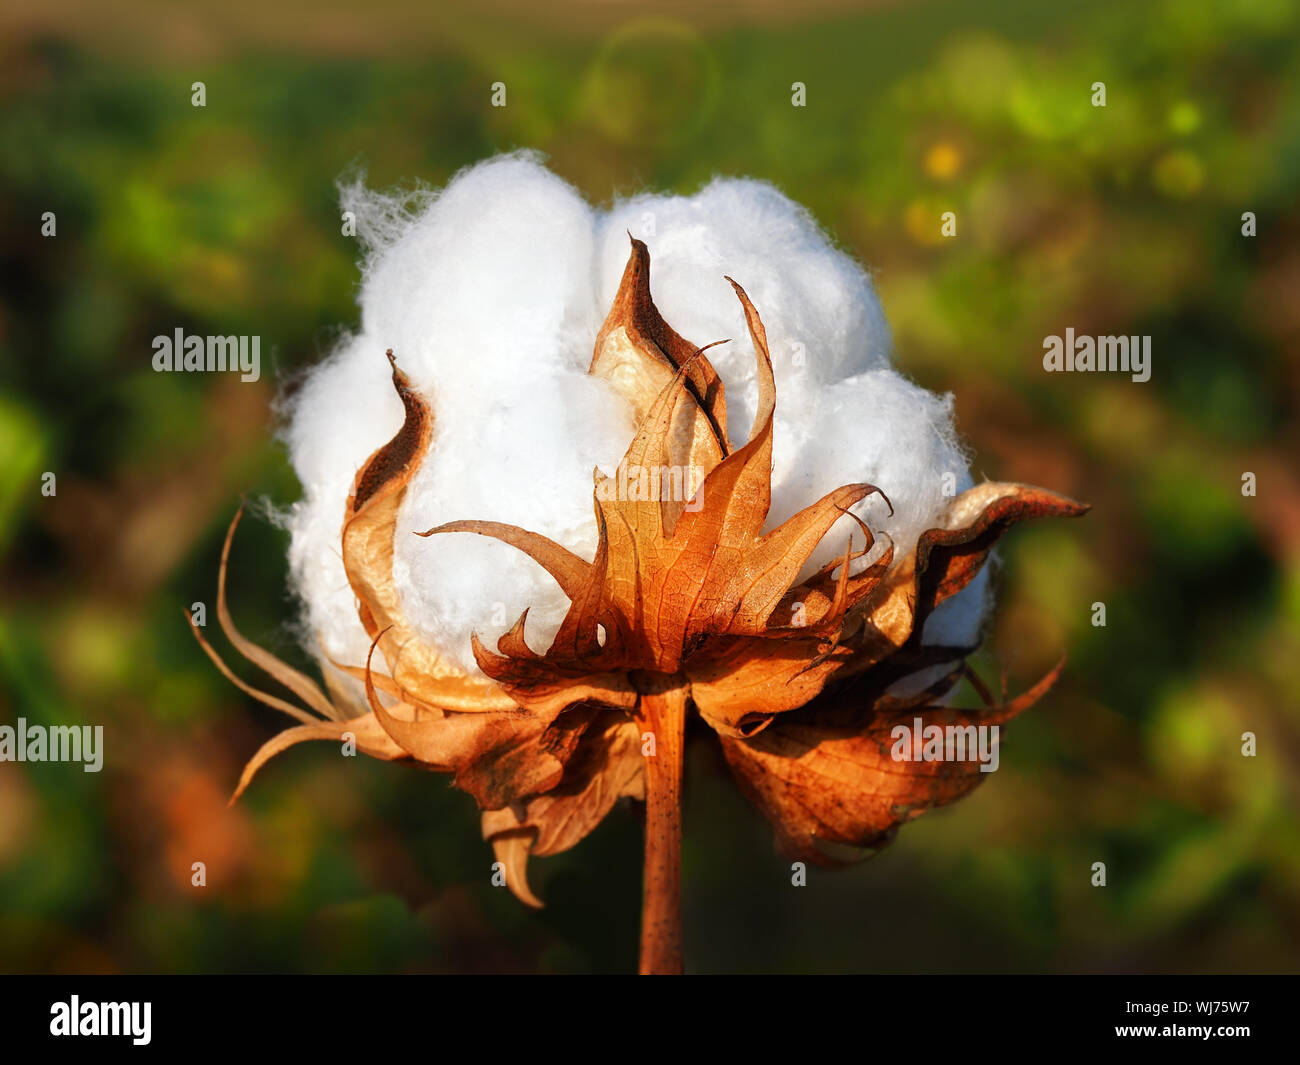 Ripe white cotton flower on a blurred background. White Fluffy Cotton and Fire Leaves. Stock Photo